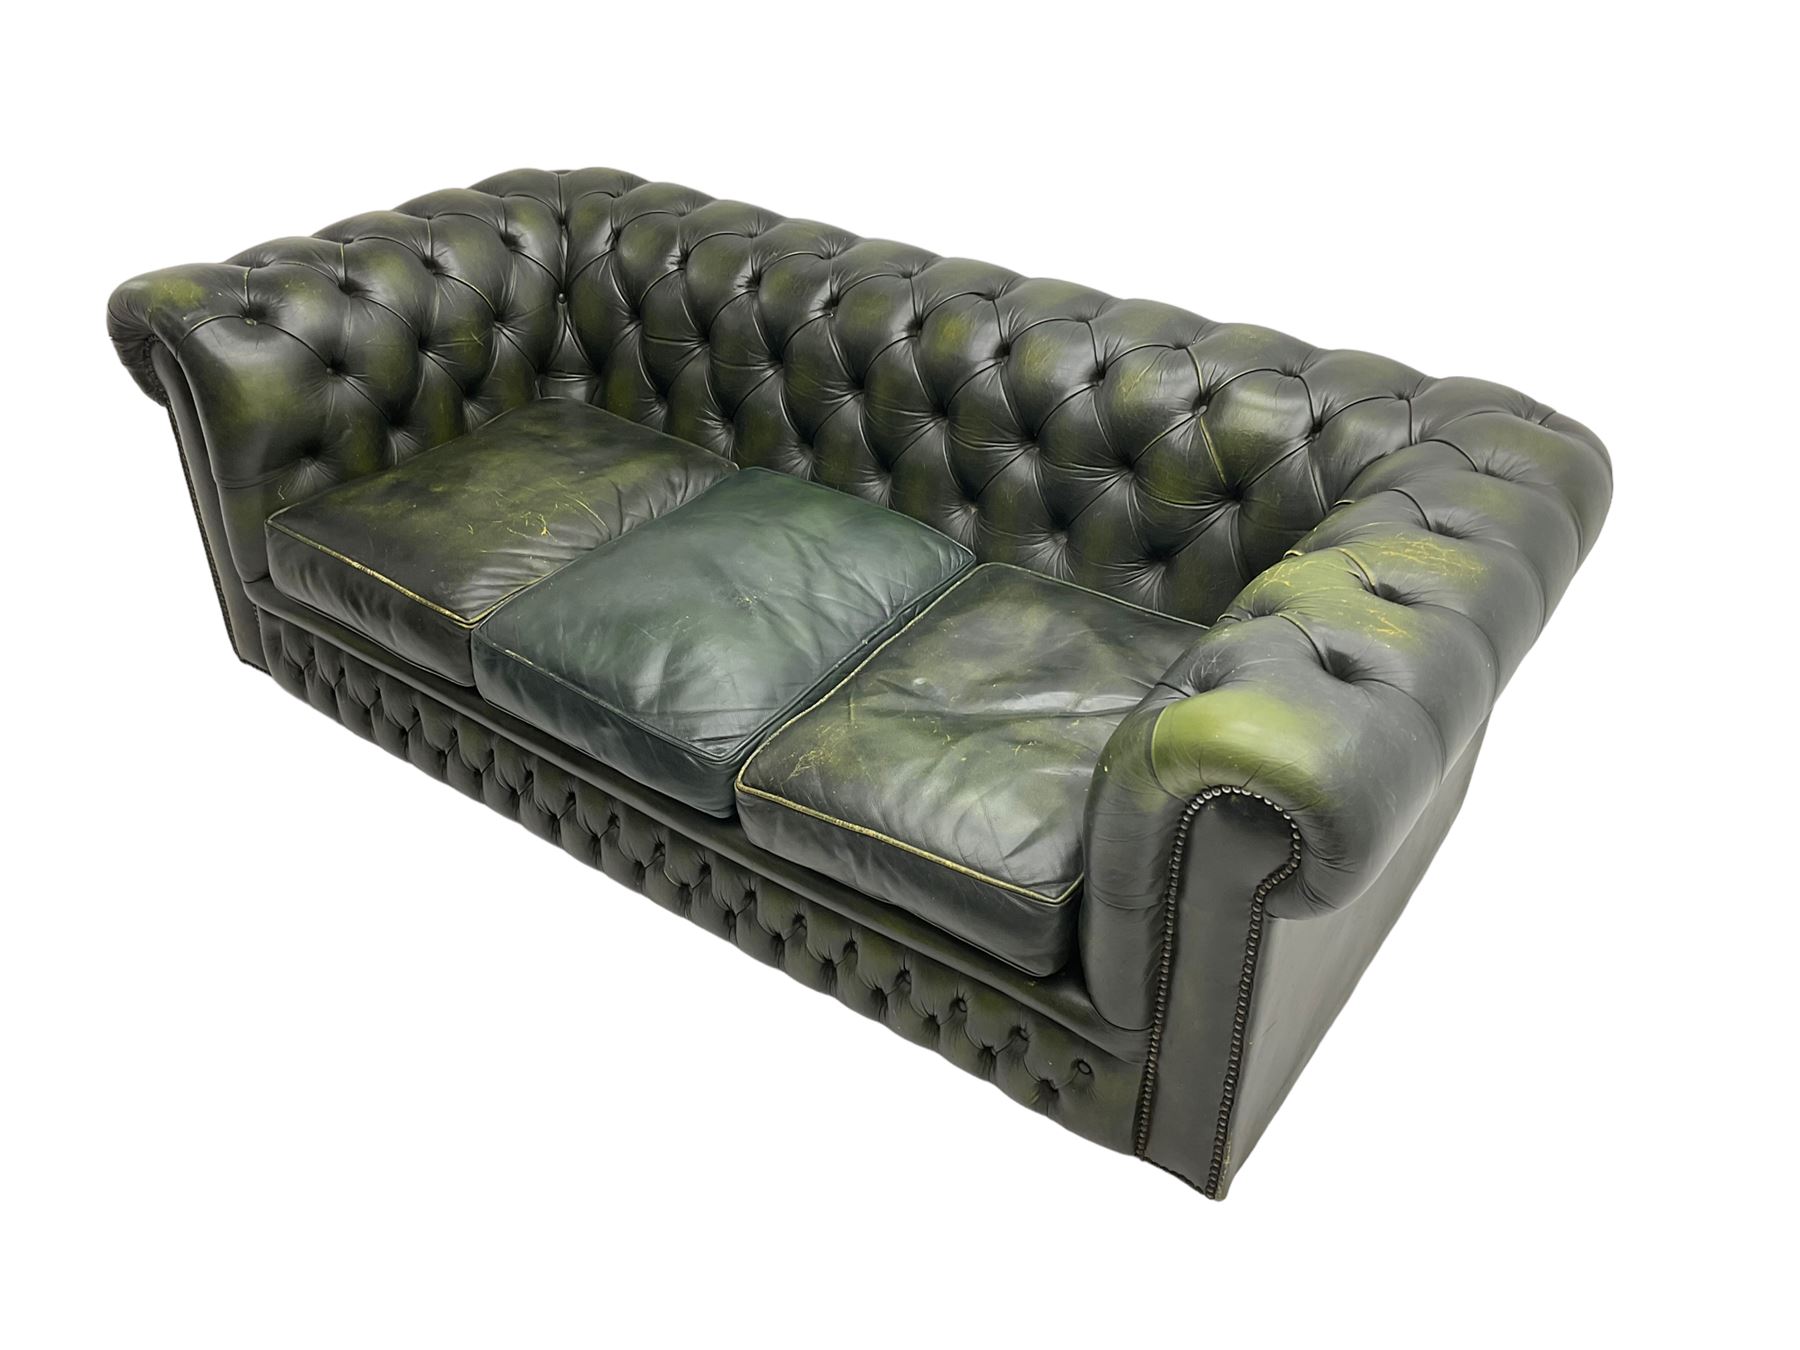 Chesterfield three seat sofa - Image 2 of 7